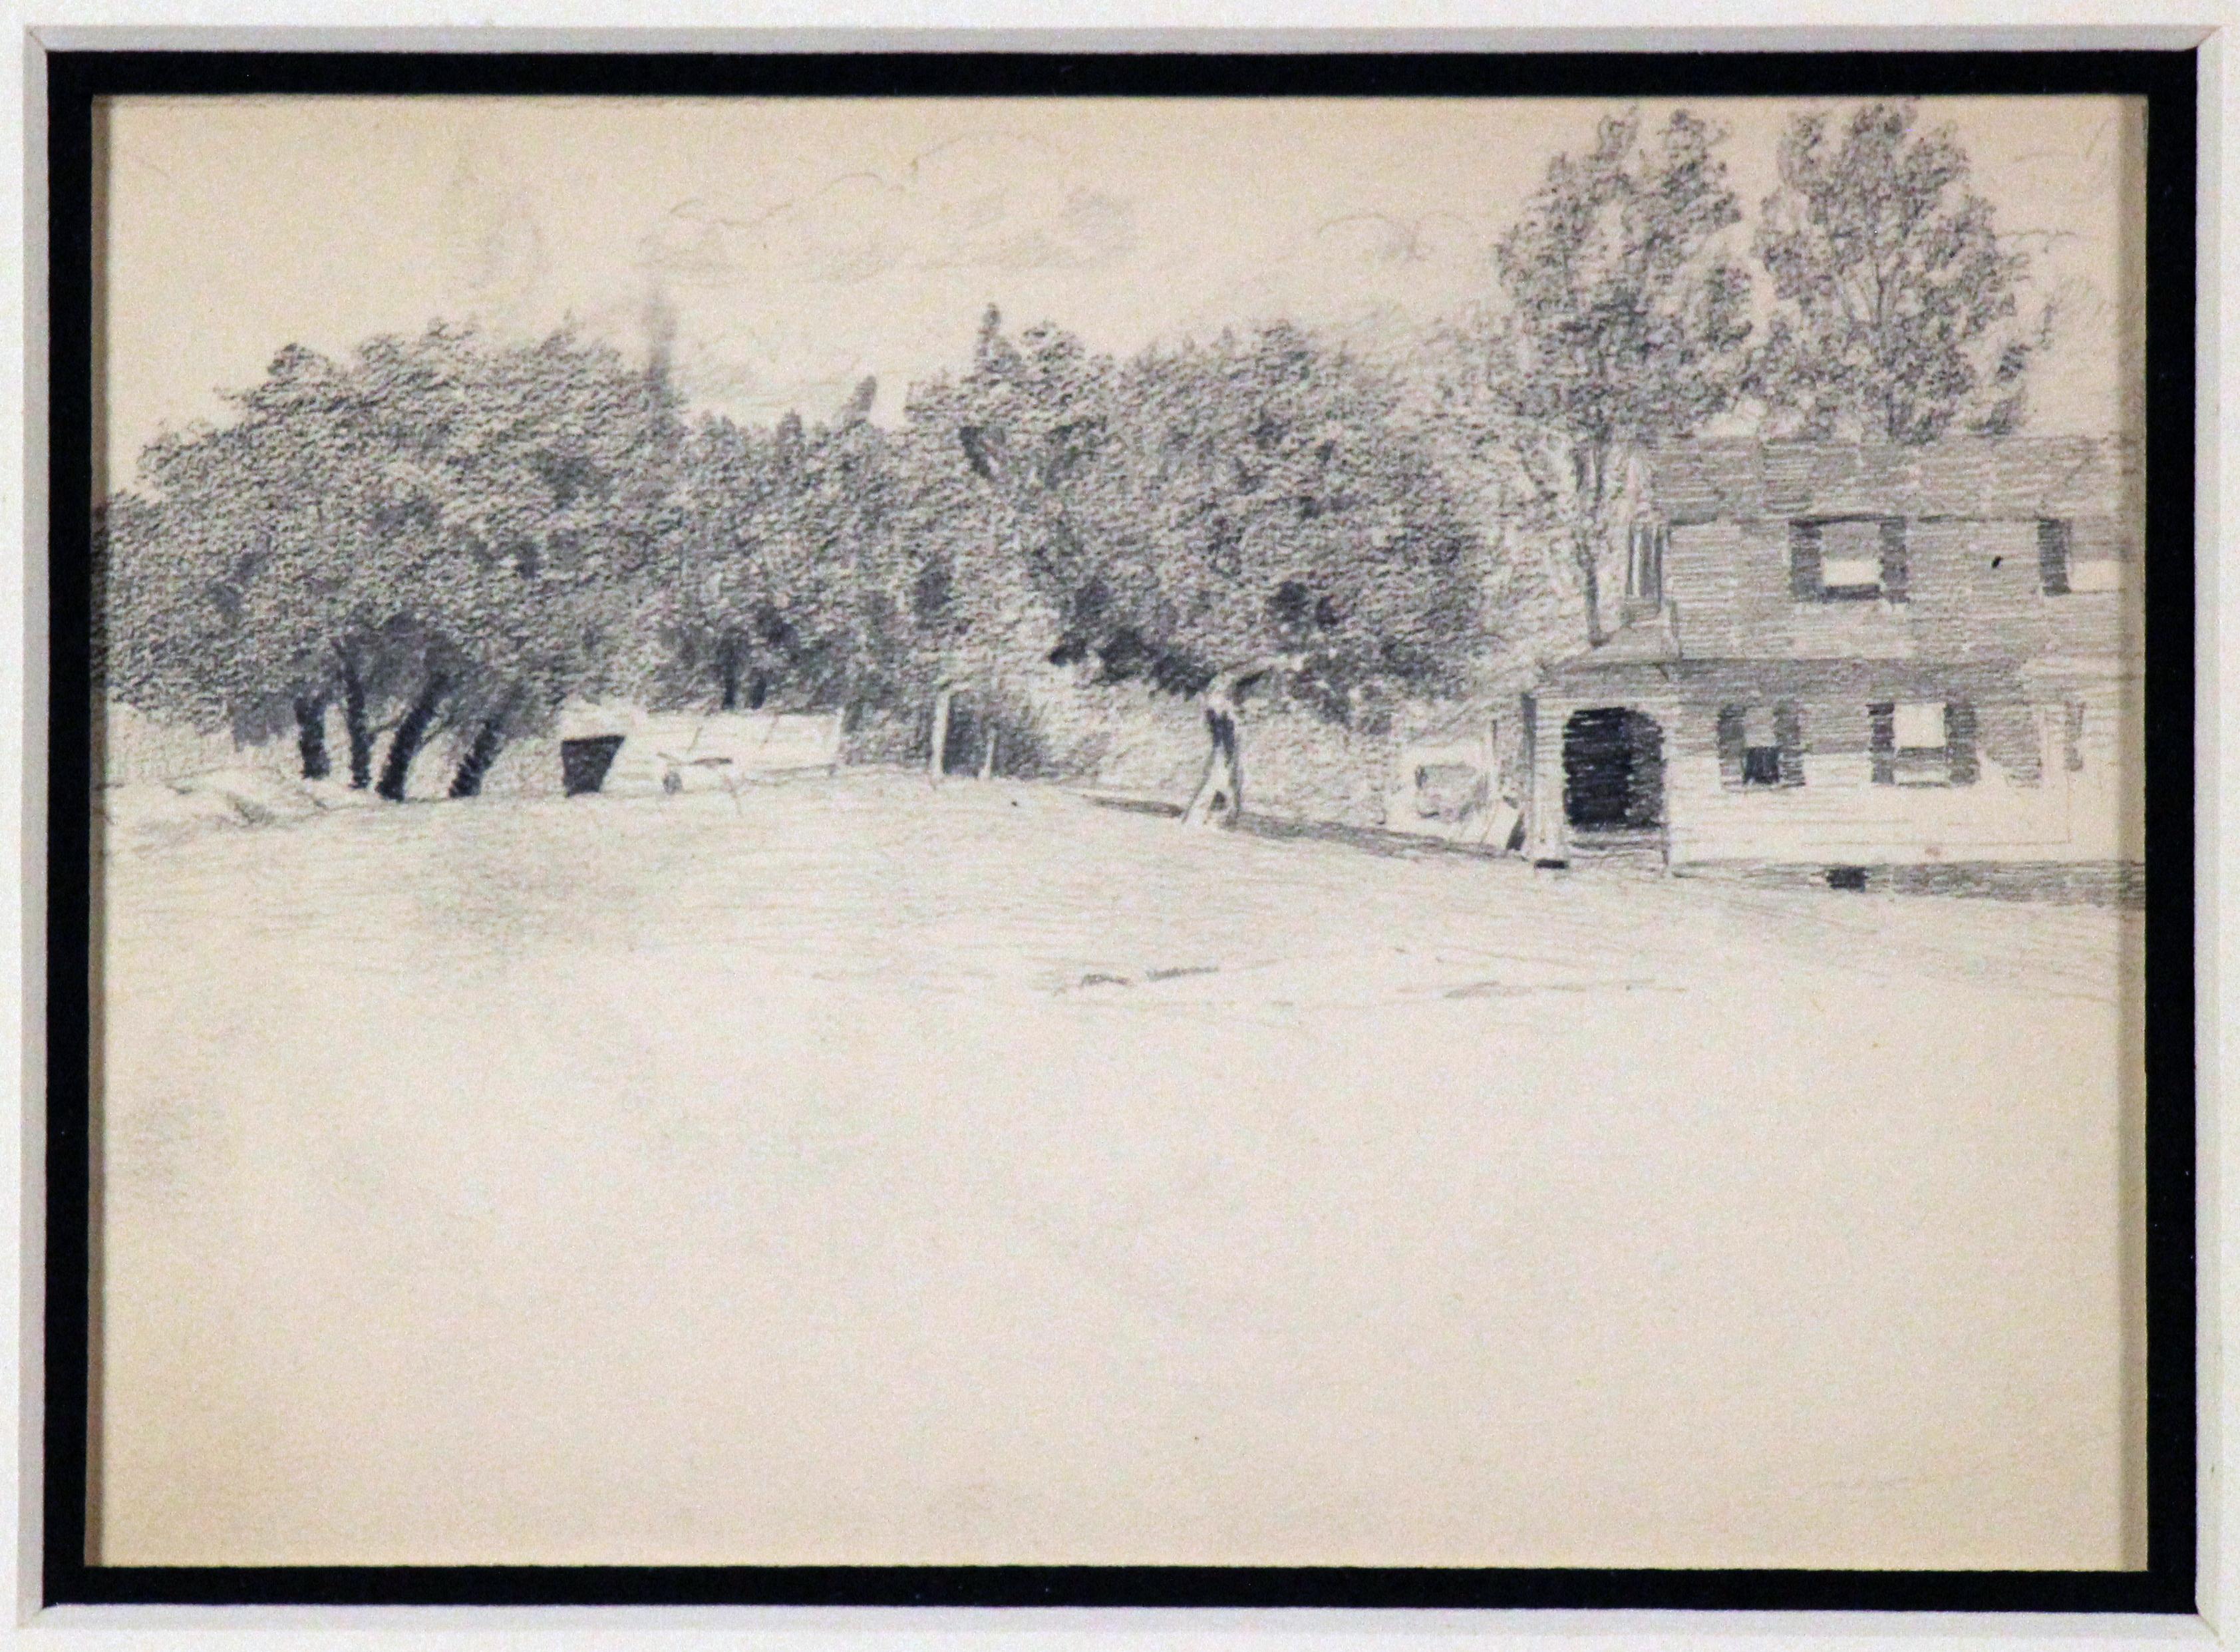 Bucks County Farmhouse, American Impressionist, Pencil Drawing on Paper, 1899 - Art by Henry Bayley Snell